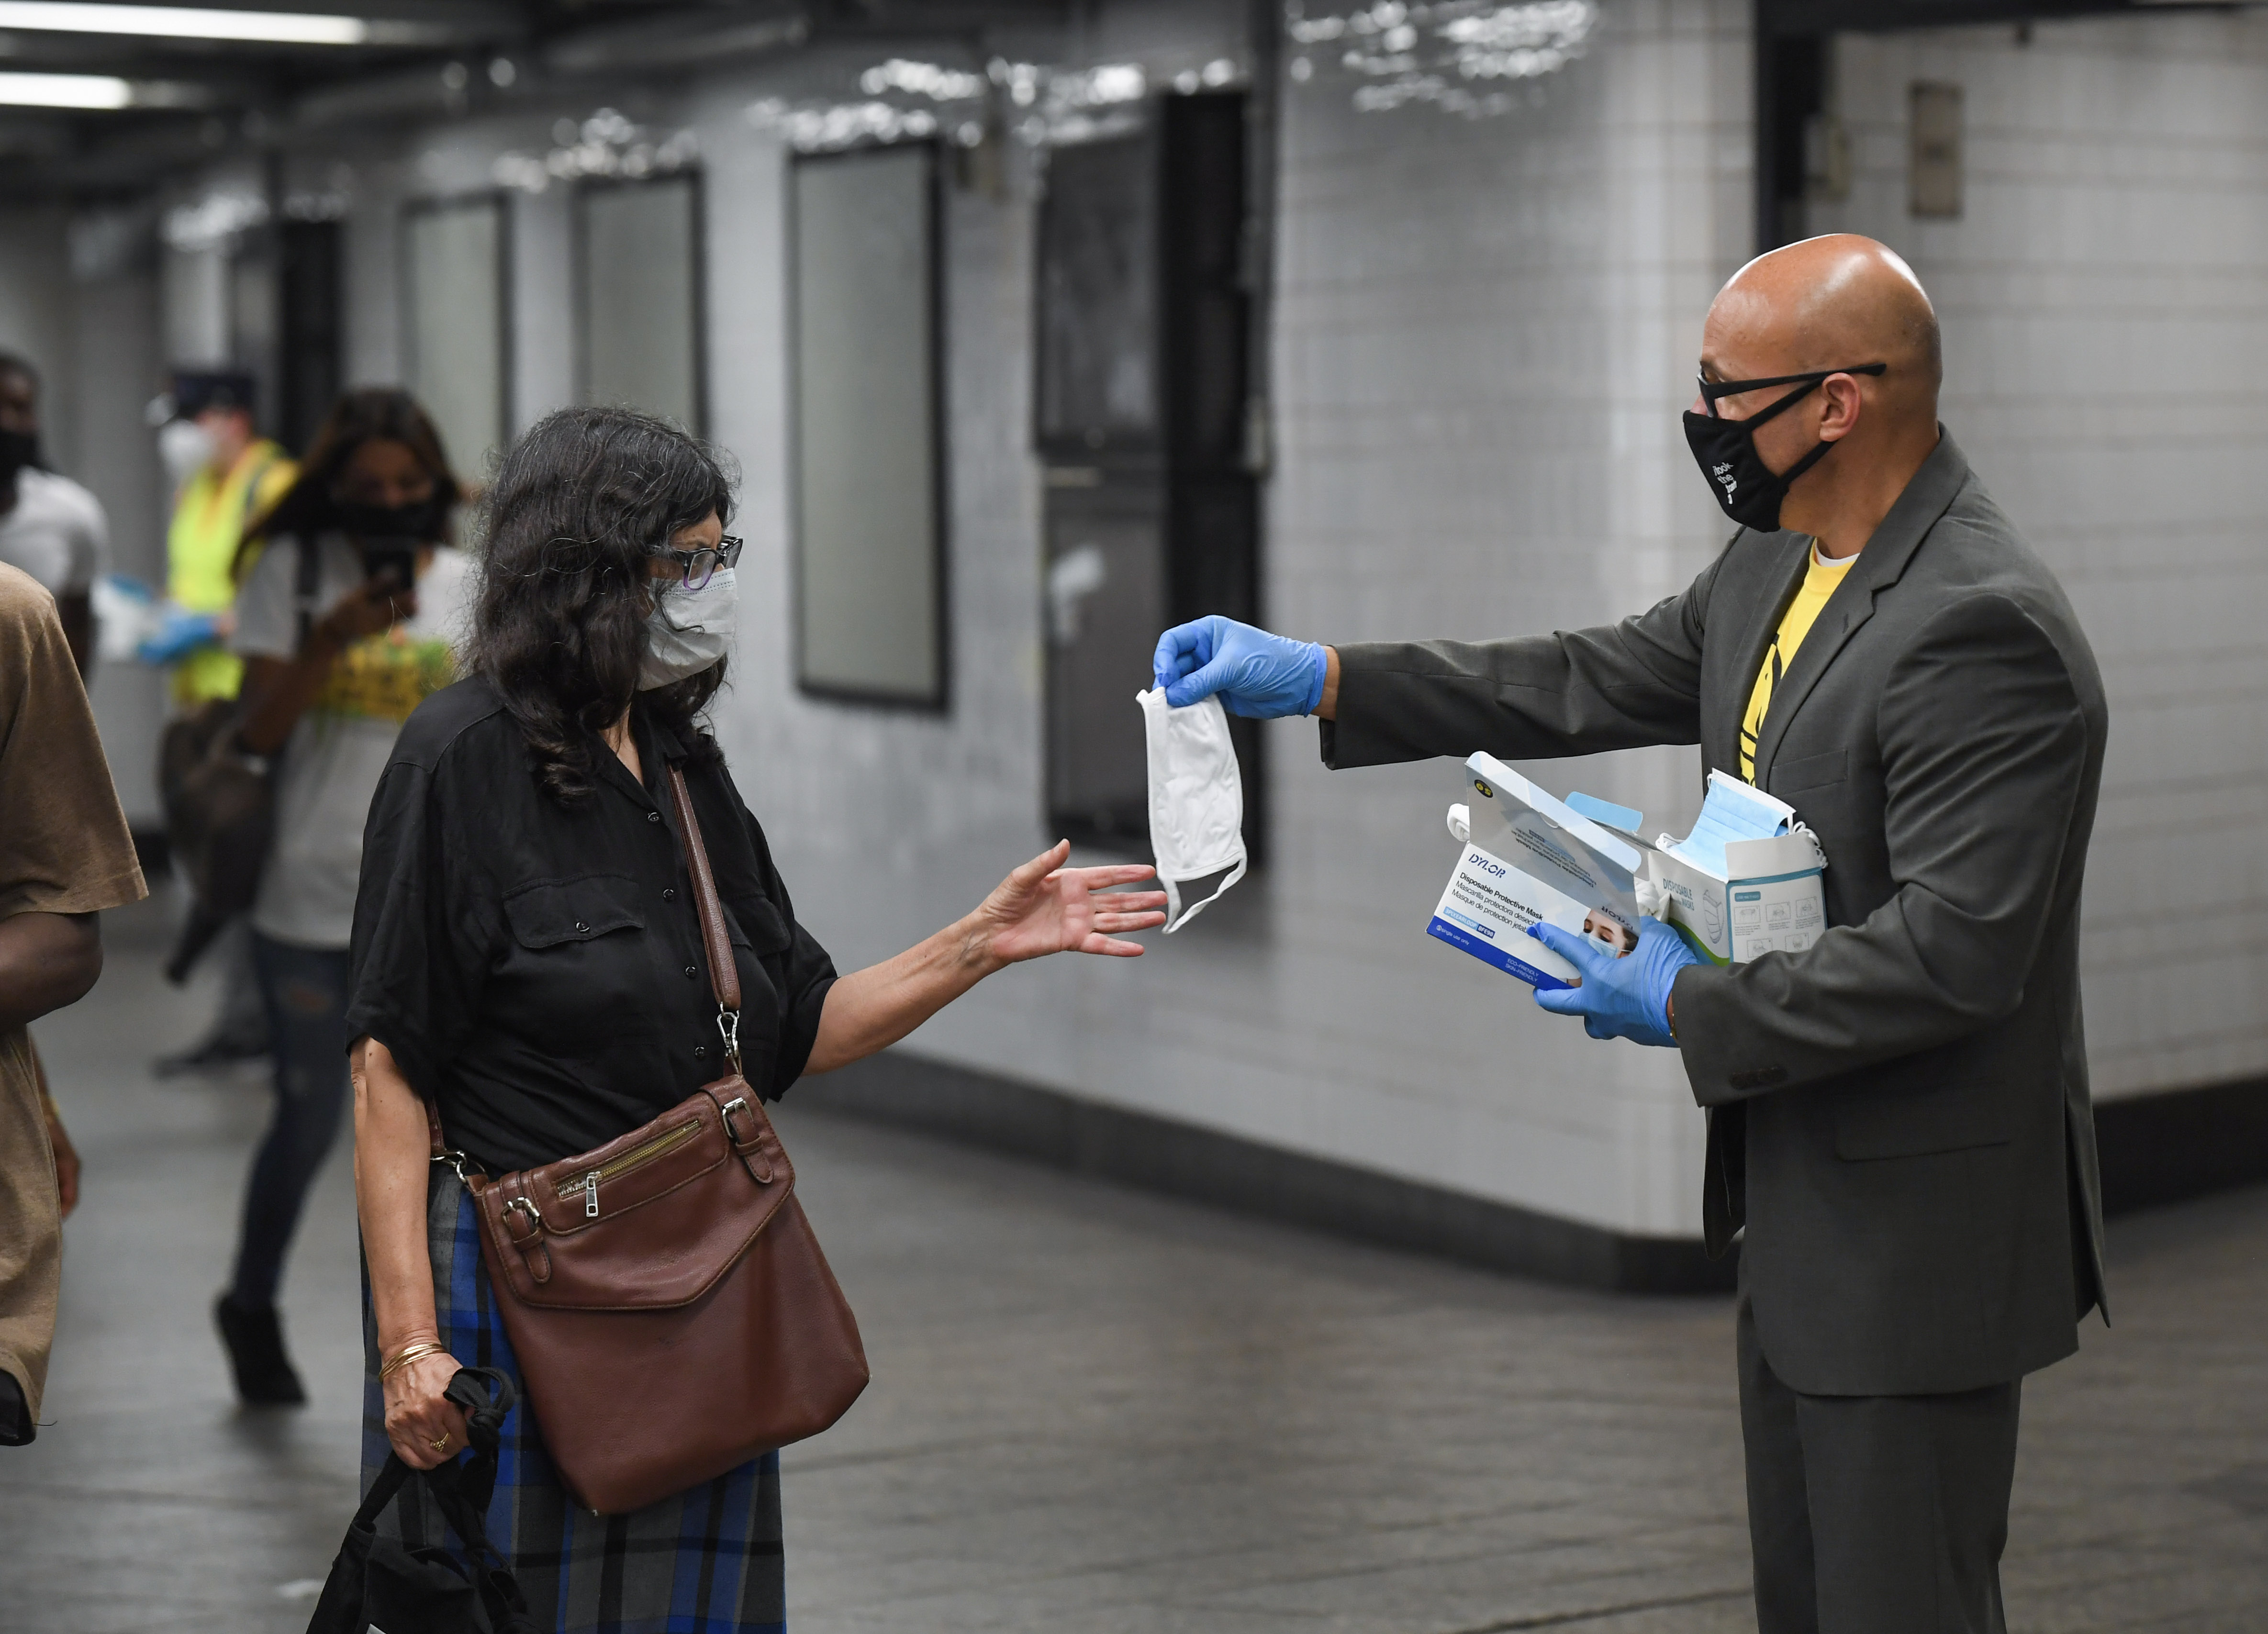 MTA Leadership Participates in Mask Force 14 While Reminding Customers Masks are Still Required on Trains and Buses